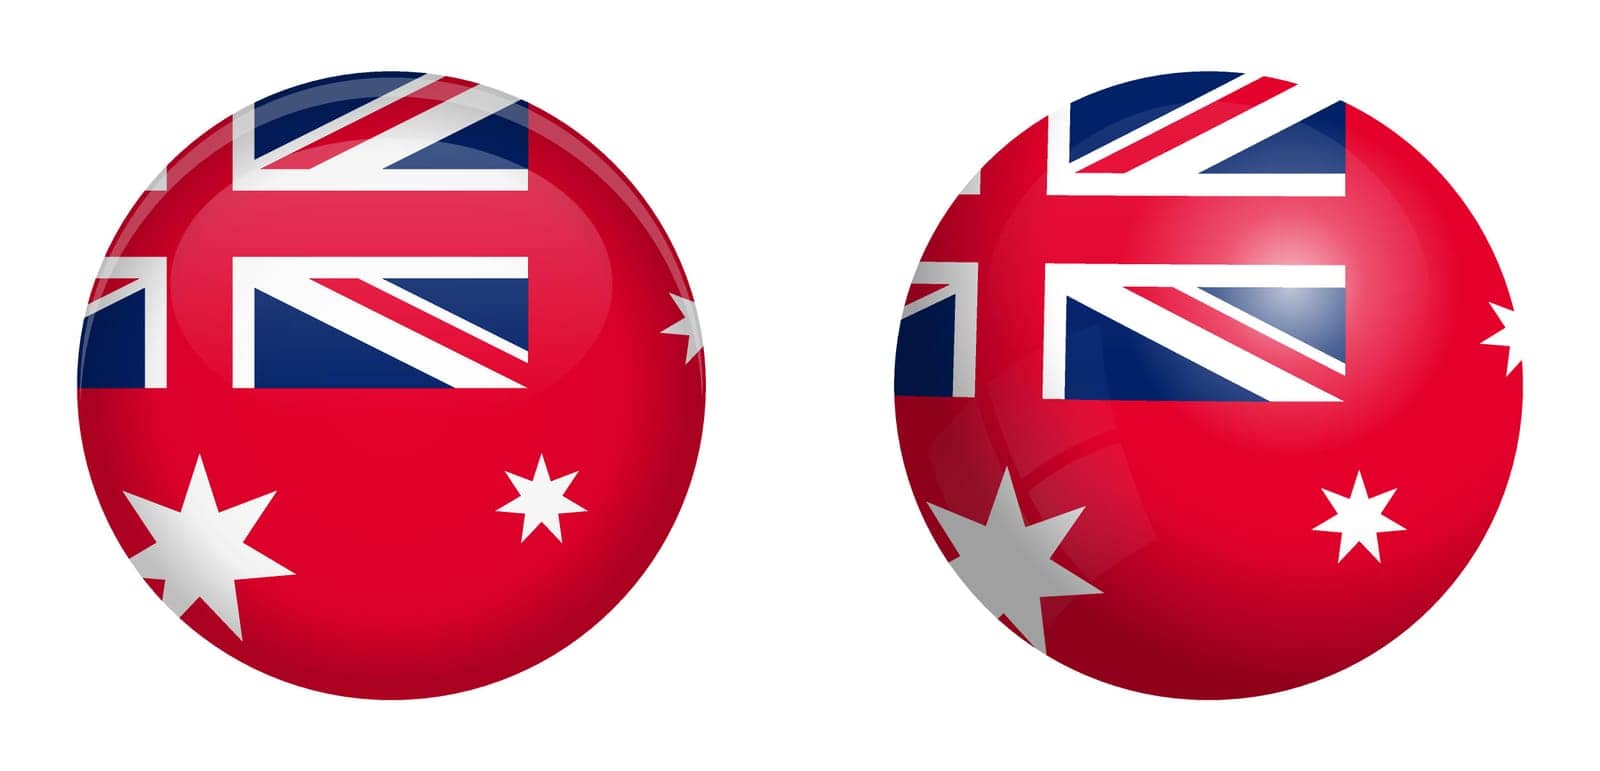 Australian red ensign flag under 3d dome button and on glossy sphere / ball. by Ivanko